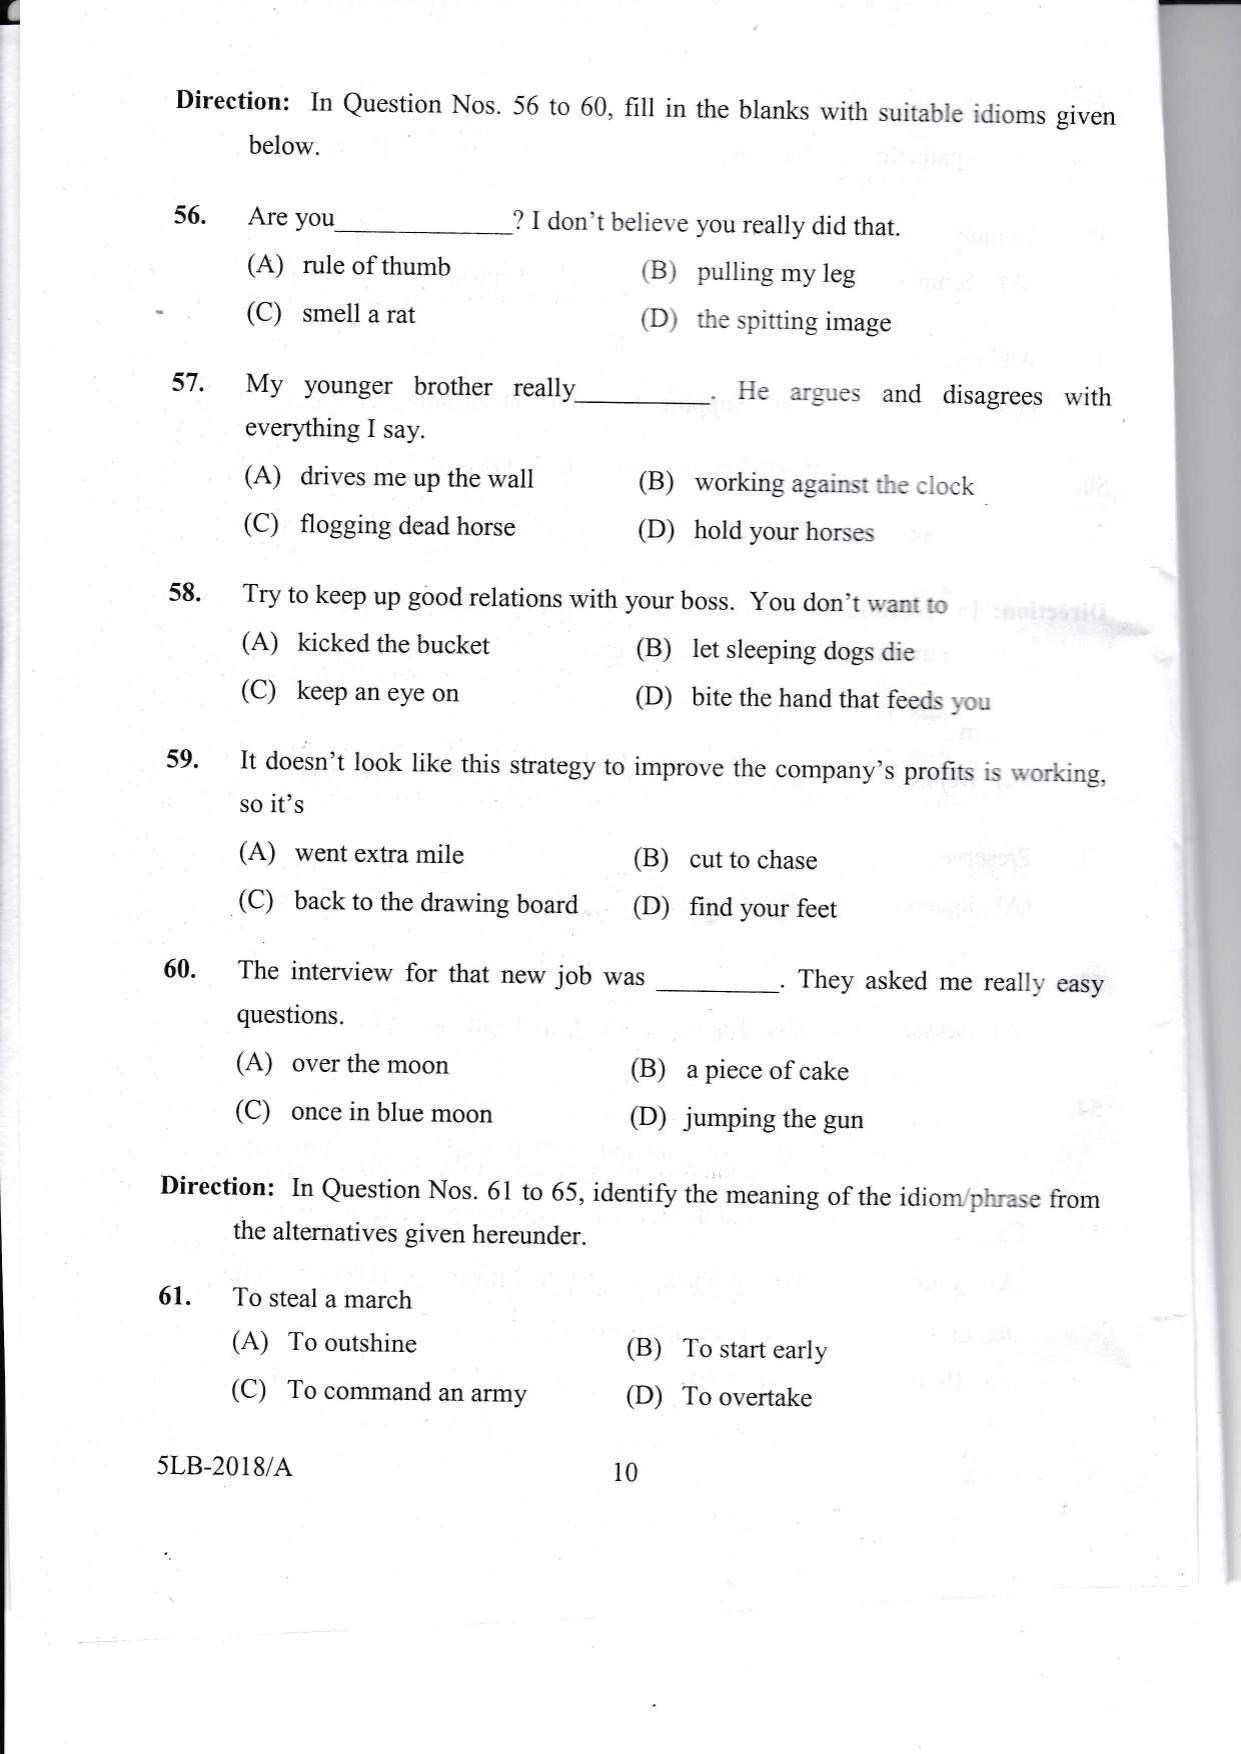 KLEE 5 Year LLB Exam 2018 Question Paper - Page 10